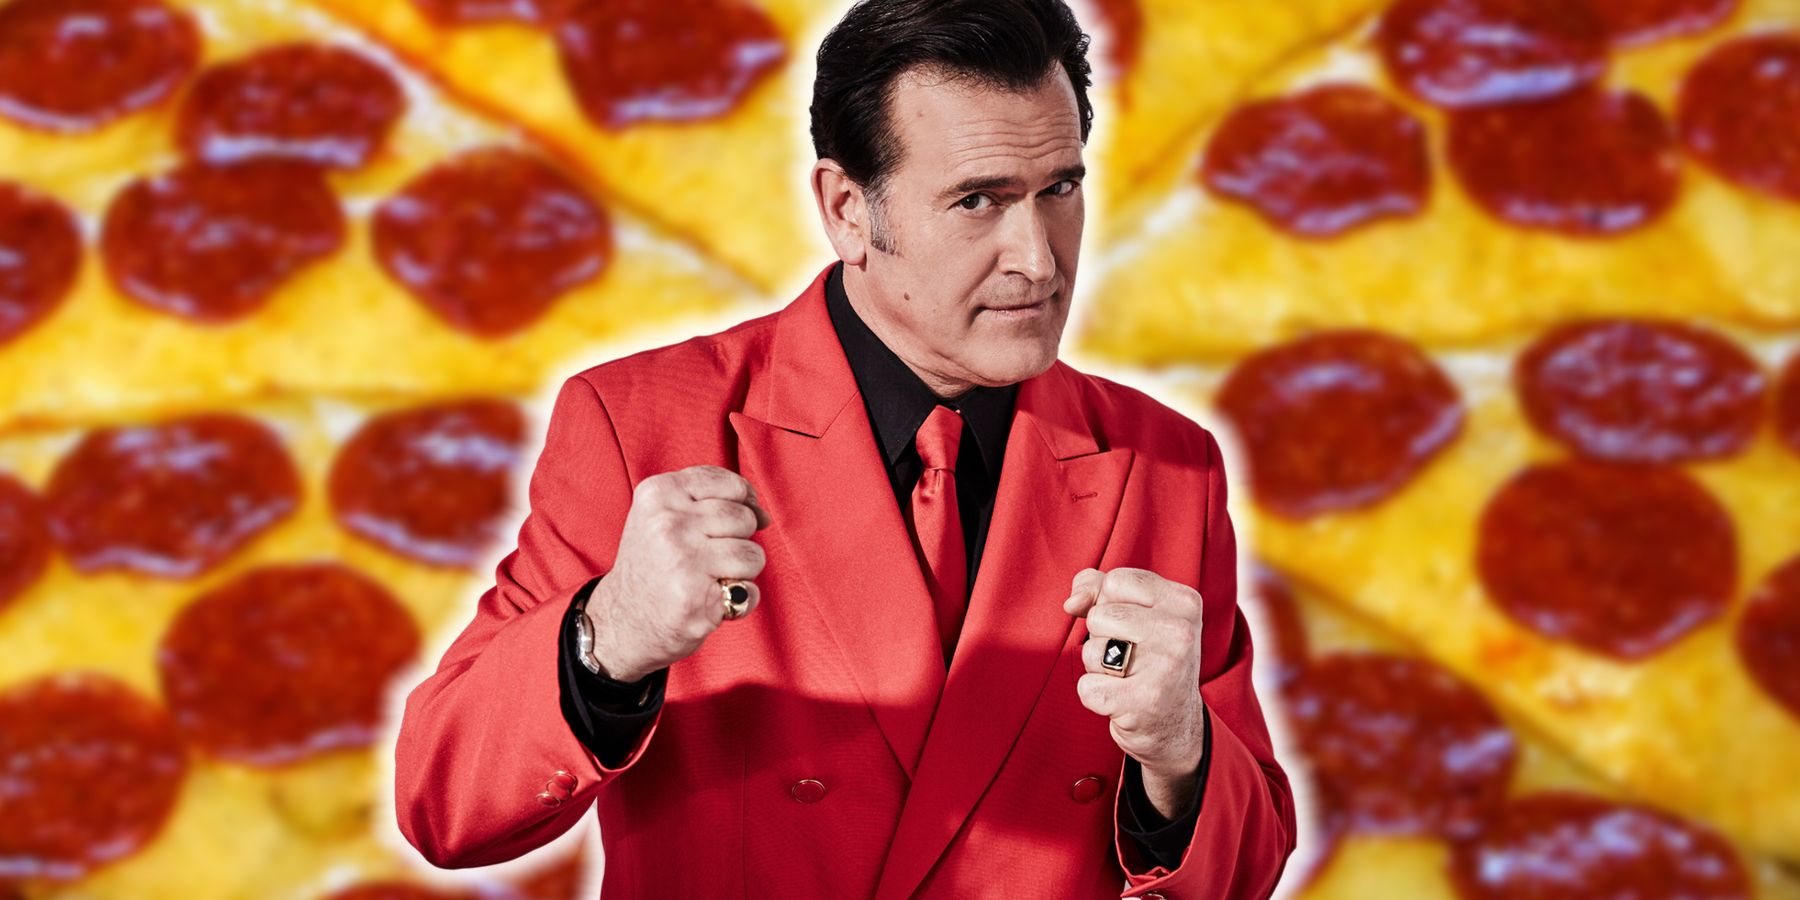 Bruce Campbell with close up pizza background